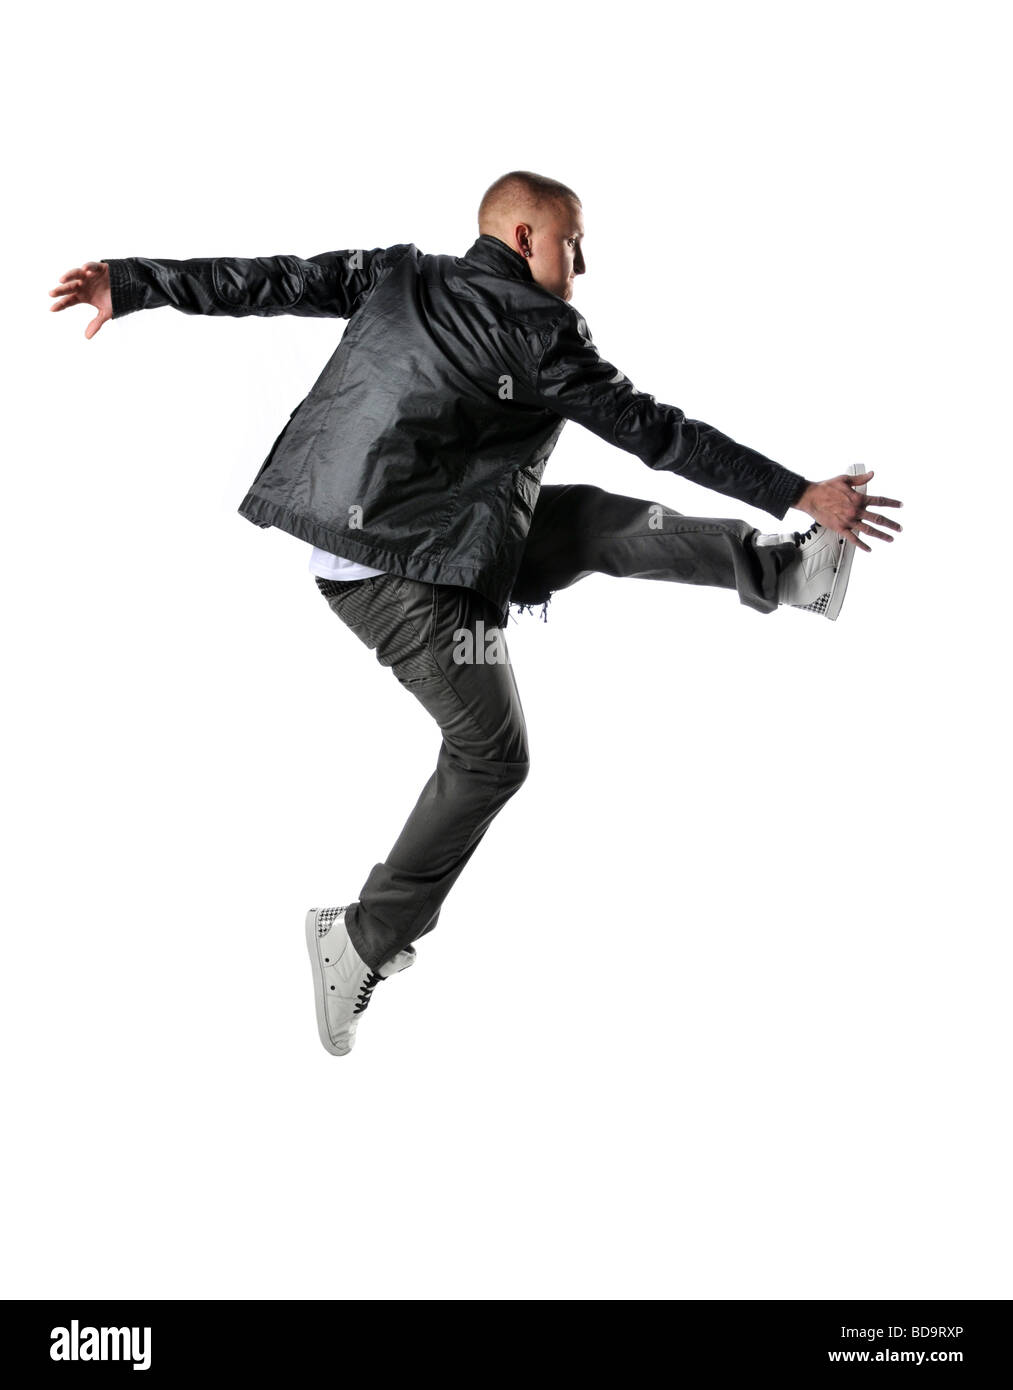 Hip hop style dancer performing jump Stock Photo